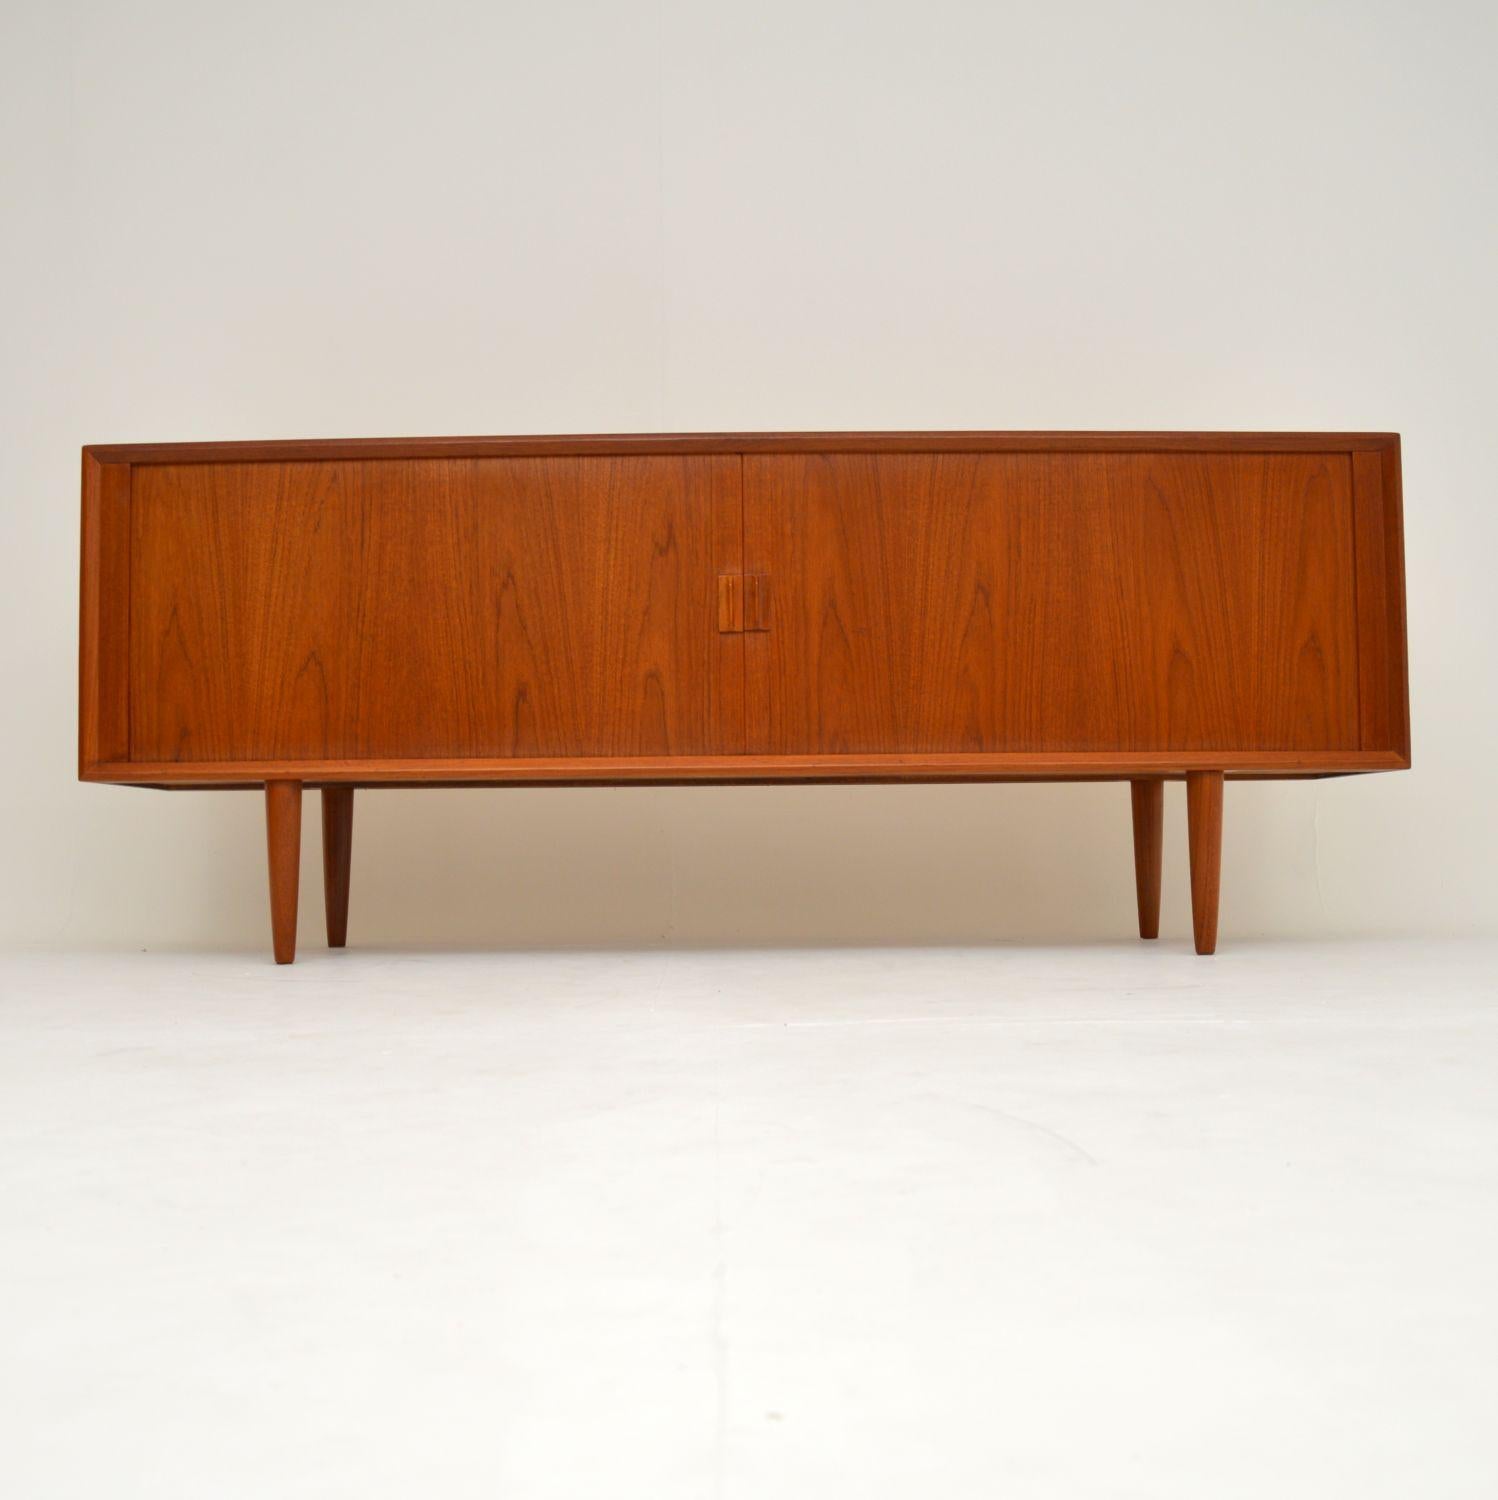 A stunning vintage Danish sideboard in teak. This was designed by Send Aage Larsen Faarup Mobelfabrik, and was made in Denmark in the 1960’s.

The quality is superb, with an amazing tambour door front. The two doors roll back inside the carcass to